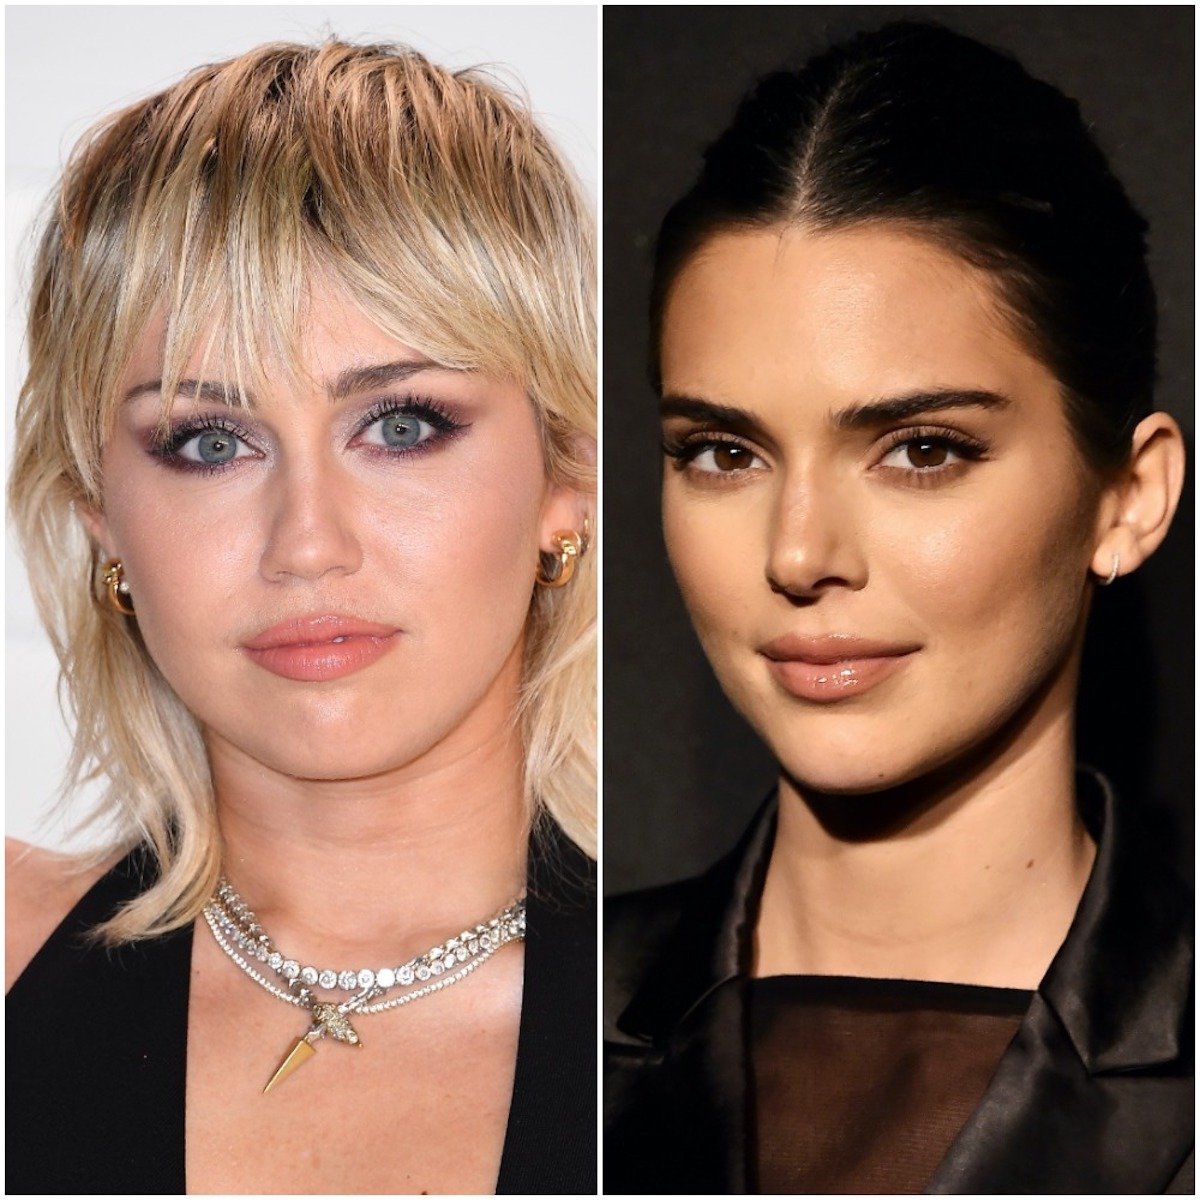 Miley Cyrus and Kendall Jenner